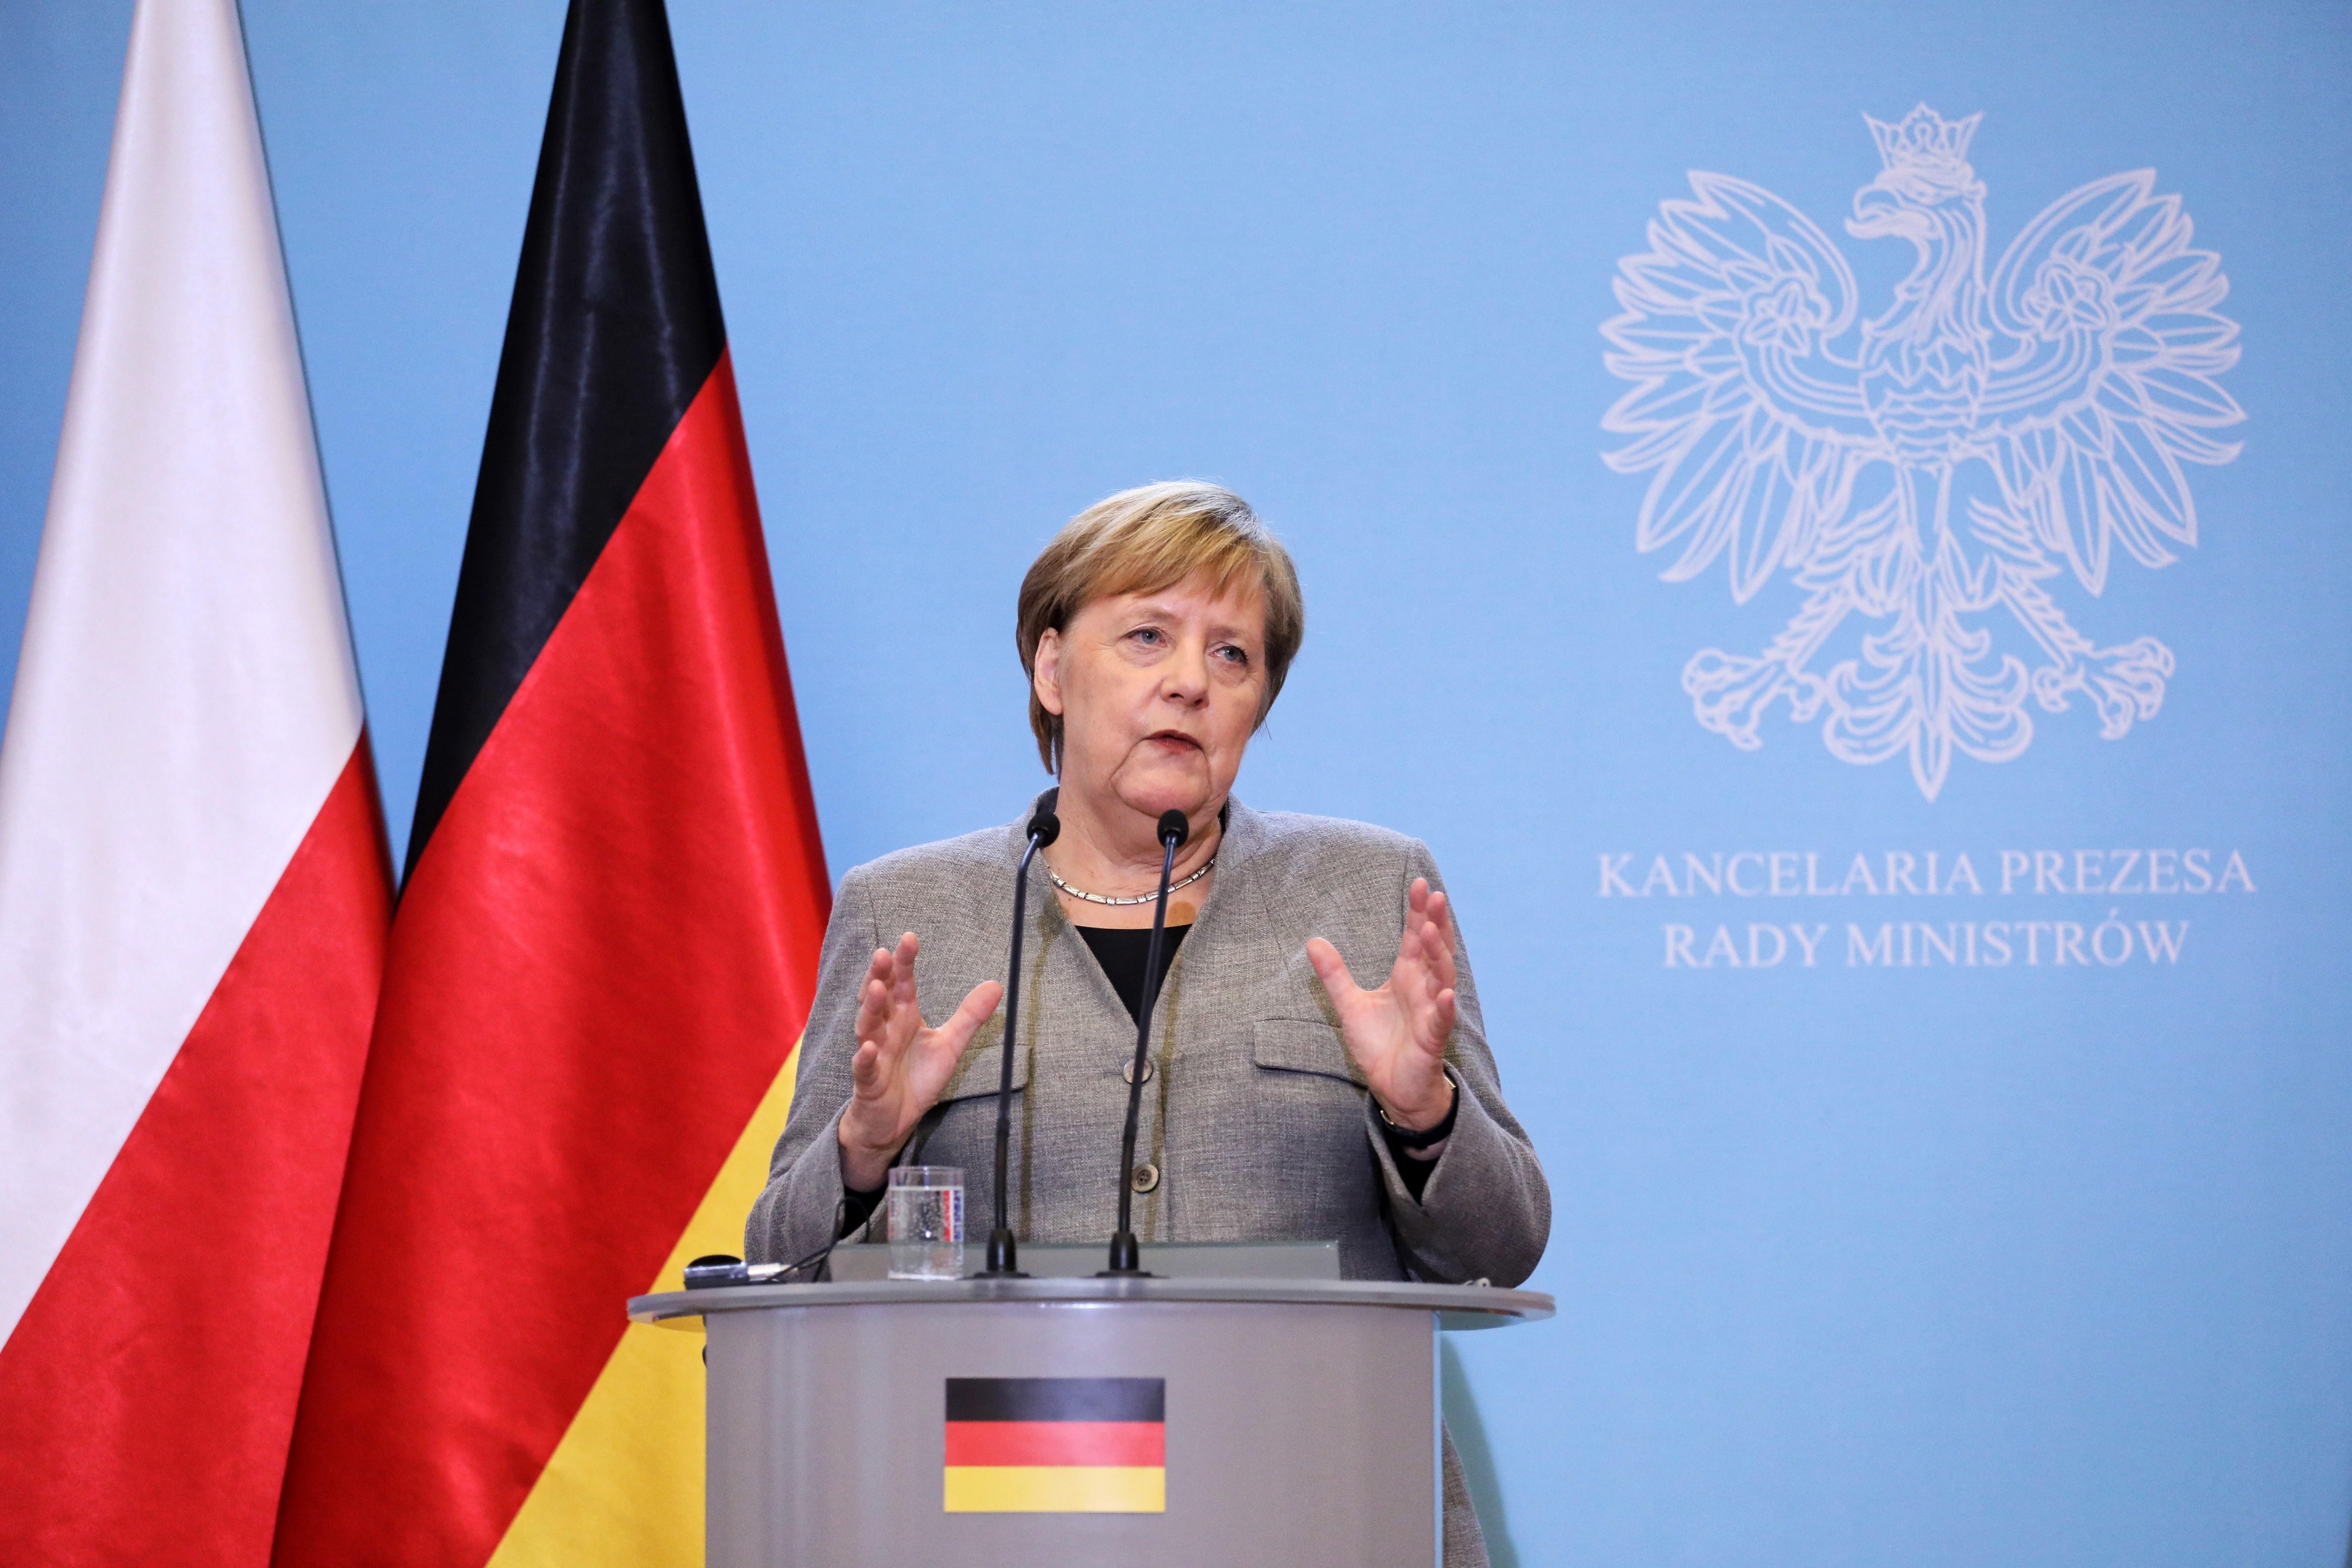 Germany reminds all European countries of the need to respect human rights